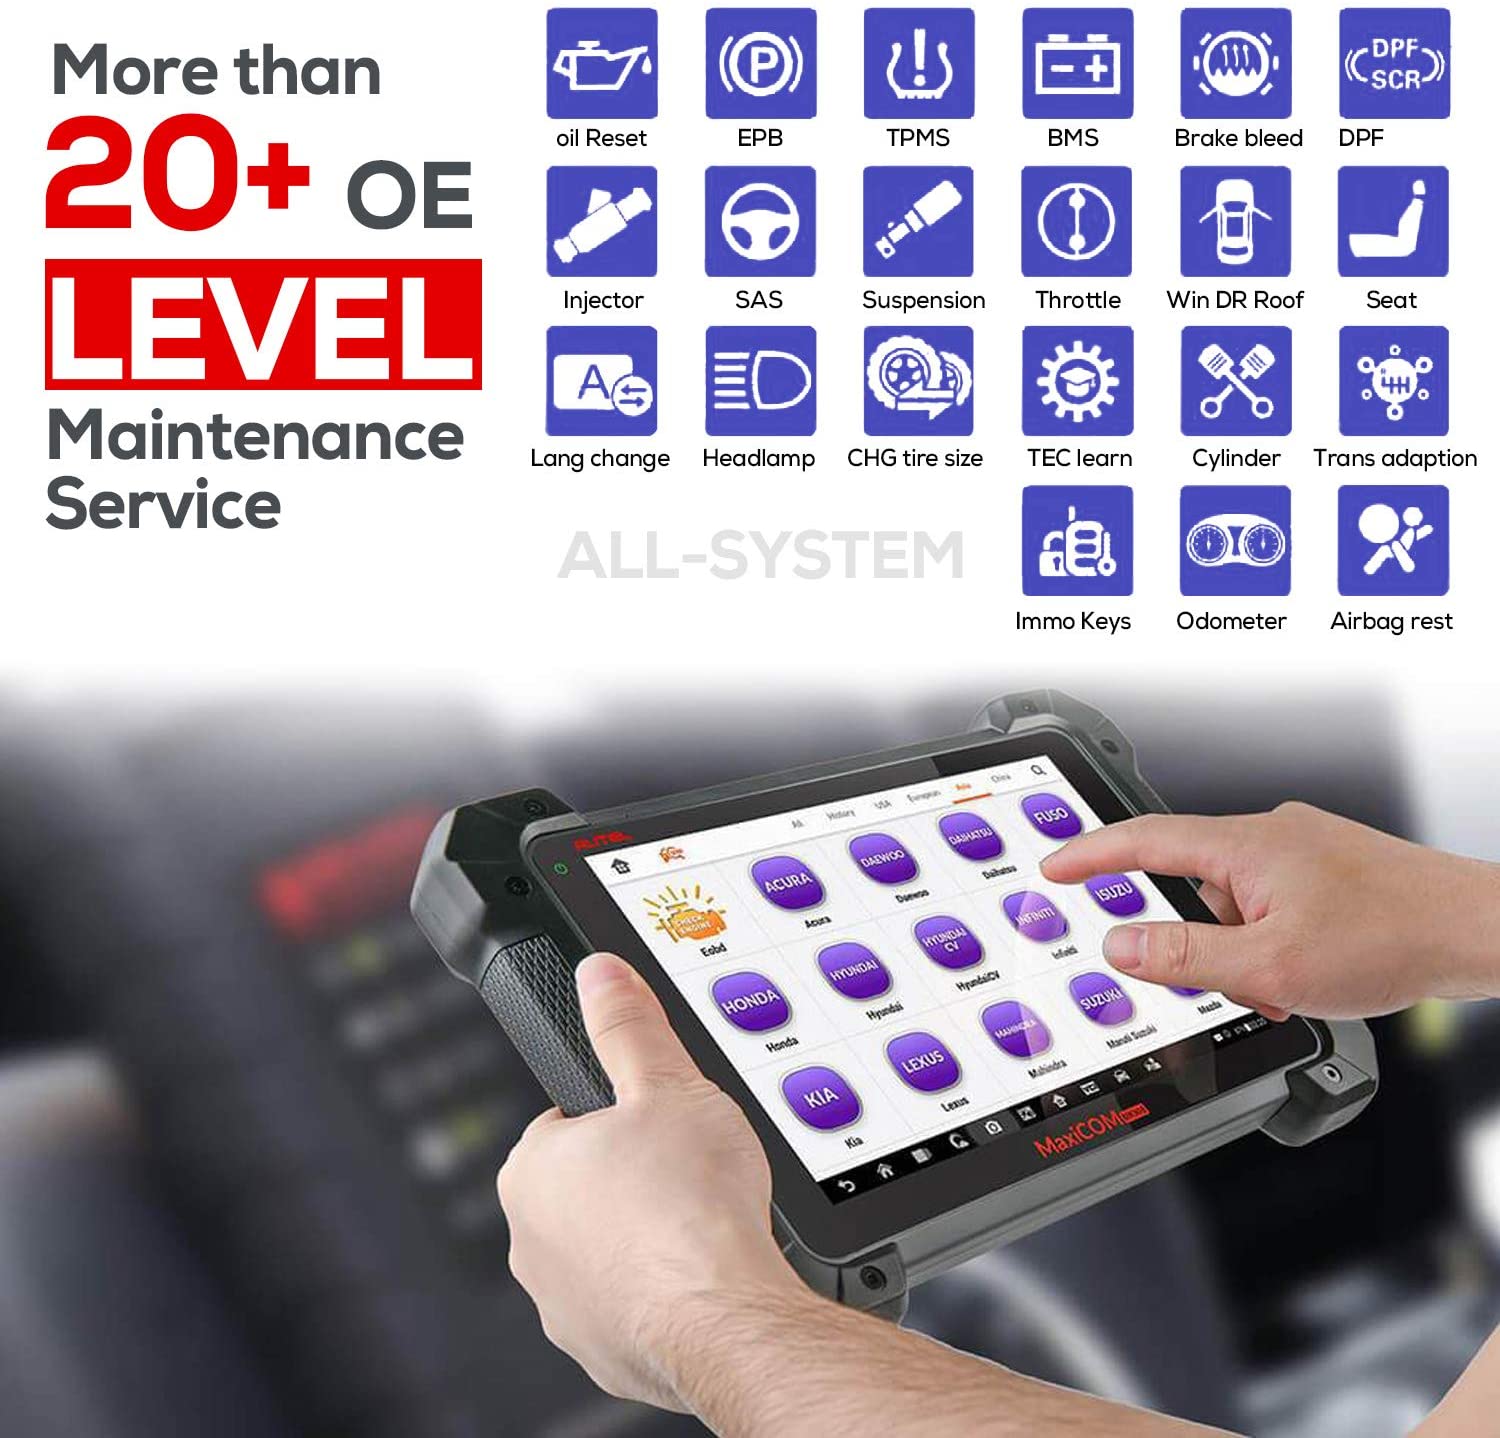 Autel MK908 has more than 20+ OE Level mainyenance service